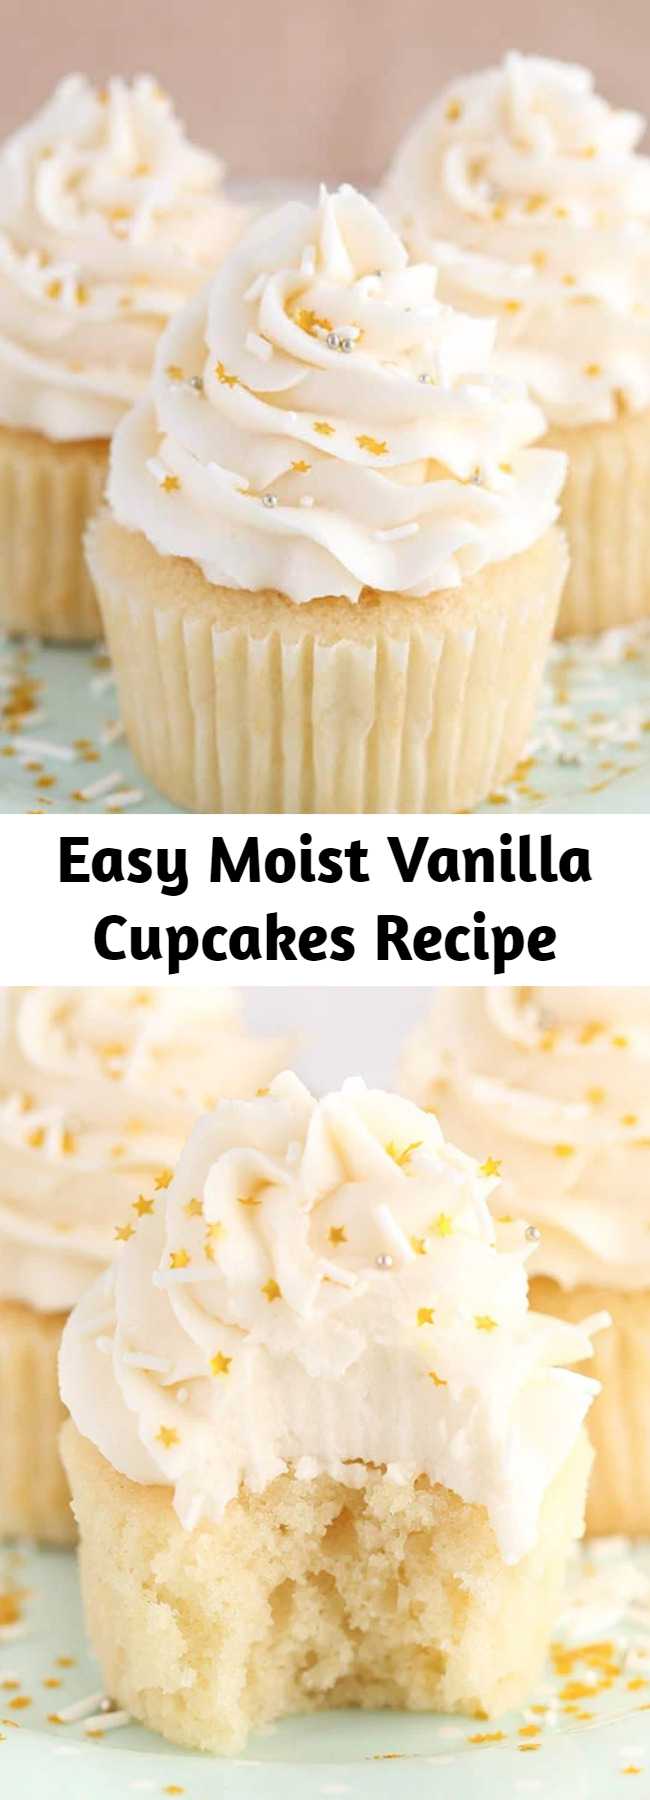 Easy Moist Vanilla Cupcakes Recipe - These Moist Vanilla Cupcakes are super easy to make and so moist – for days! They are my new favorite vanilla cupcake!